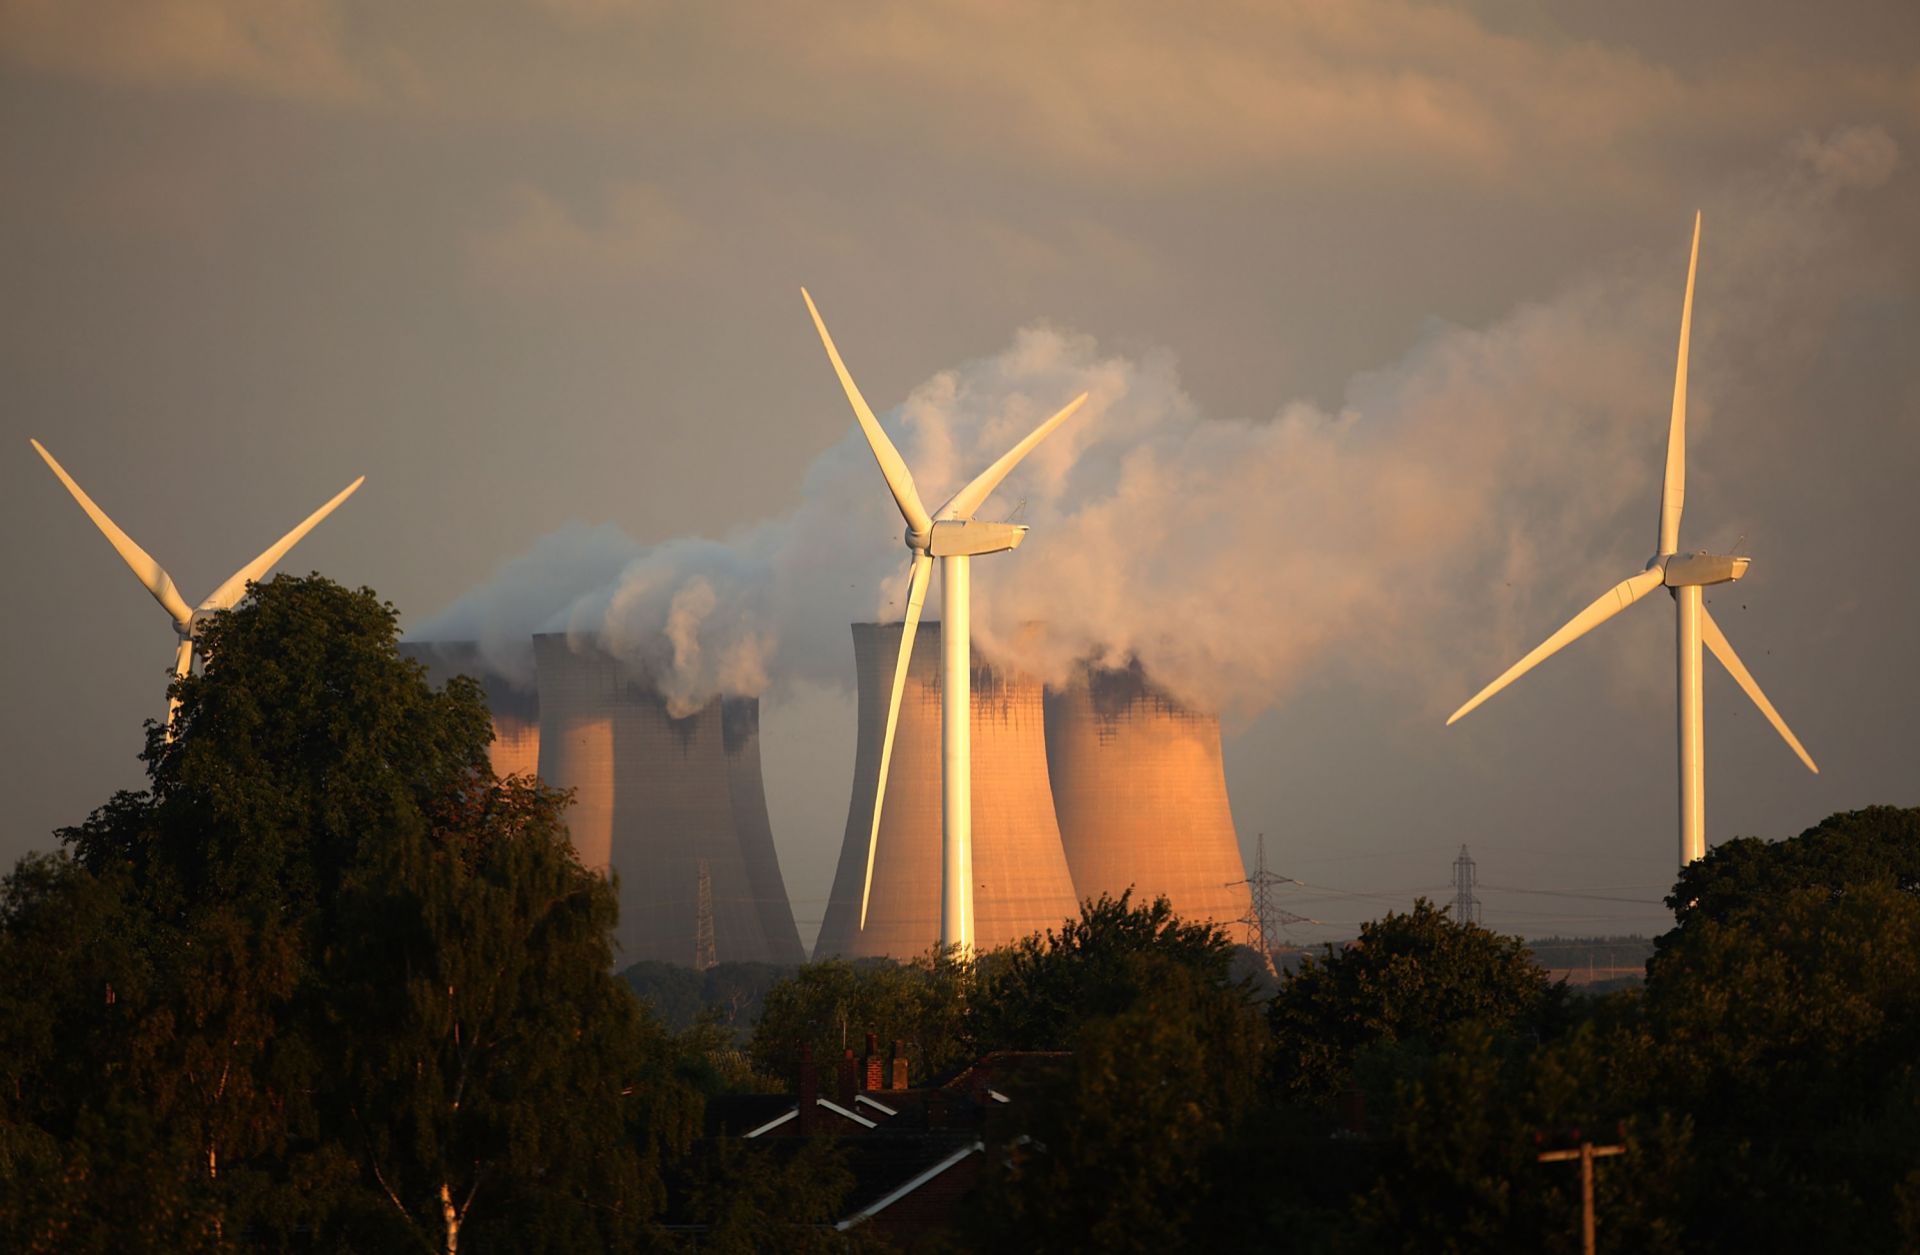 Wind turbines spin alongside the Drax power station, the biggest coal-fired plant in Europe.